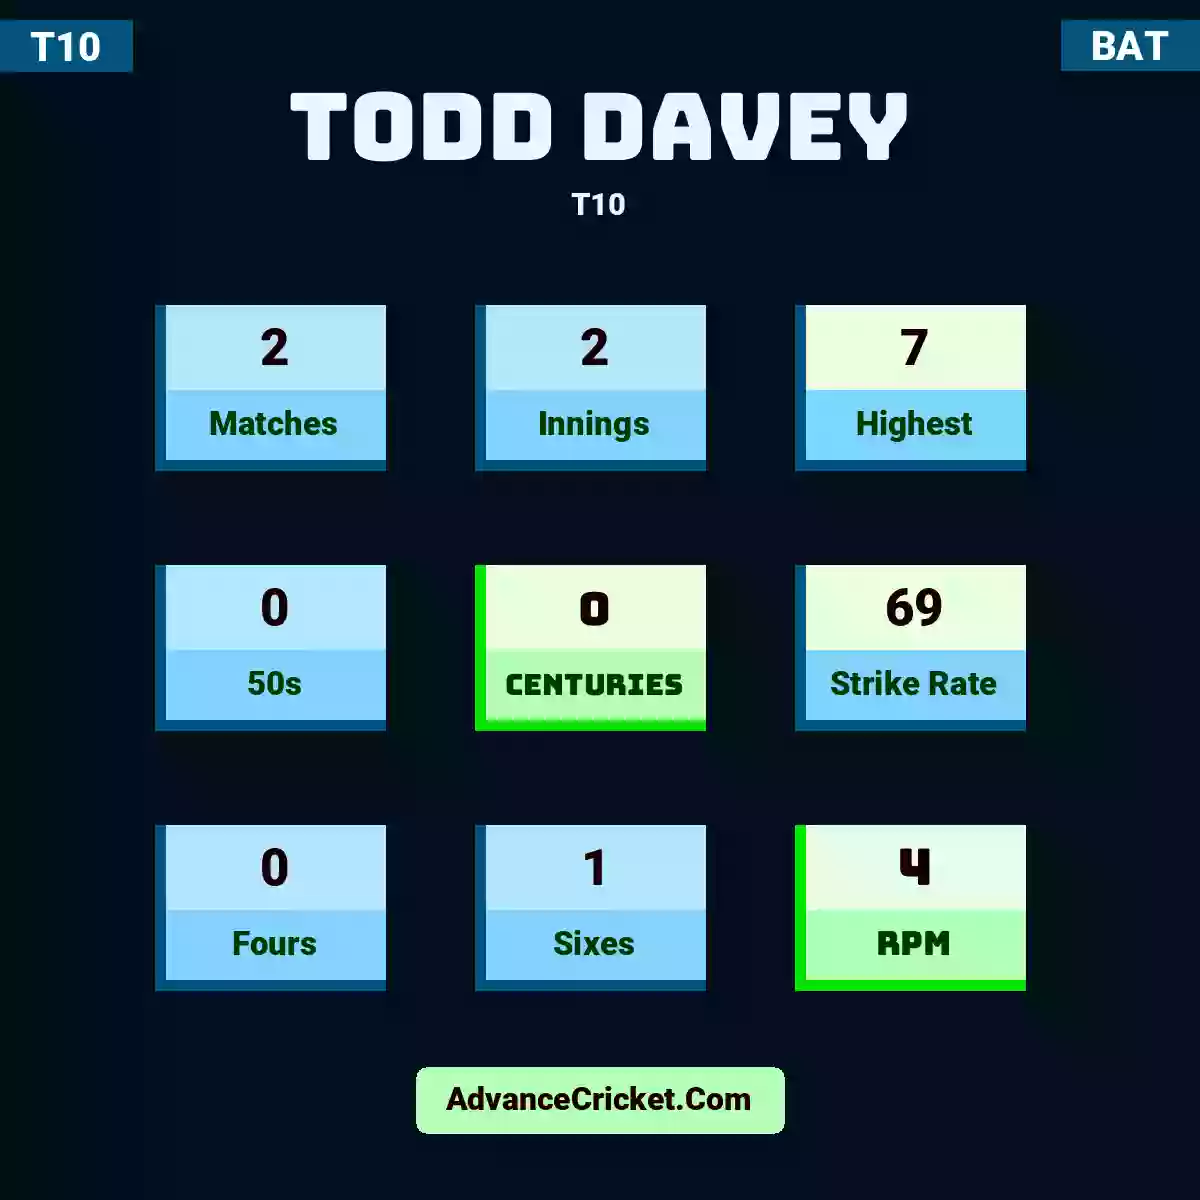 Todd Davey T10 , Todd Davey played 2 matches, scored 7 runs as highest, 0 half-centuries, and 0 centuries, with a strike rate of 69. t.davey hit 0 fours and 1 sixes, with an RPM of 4.